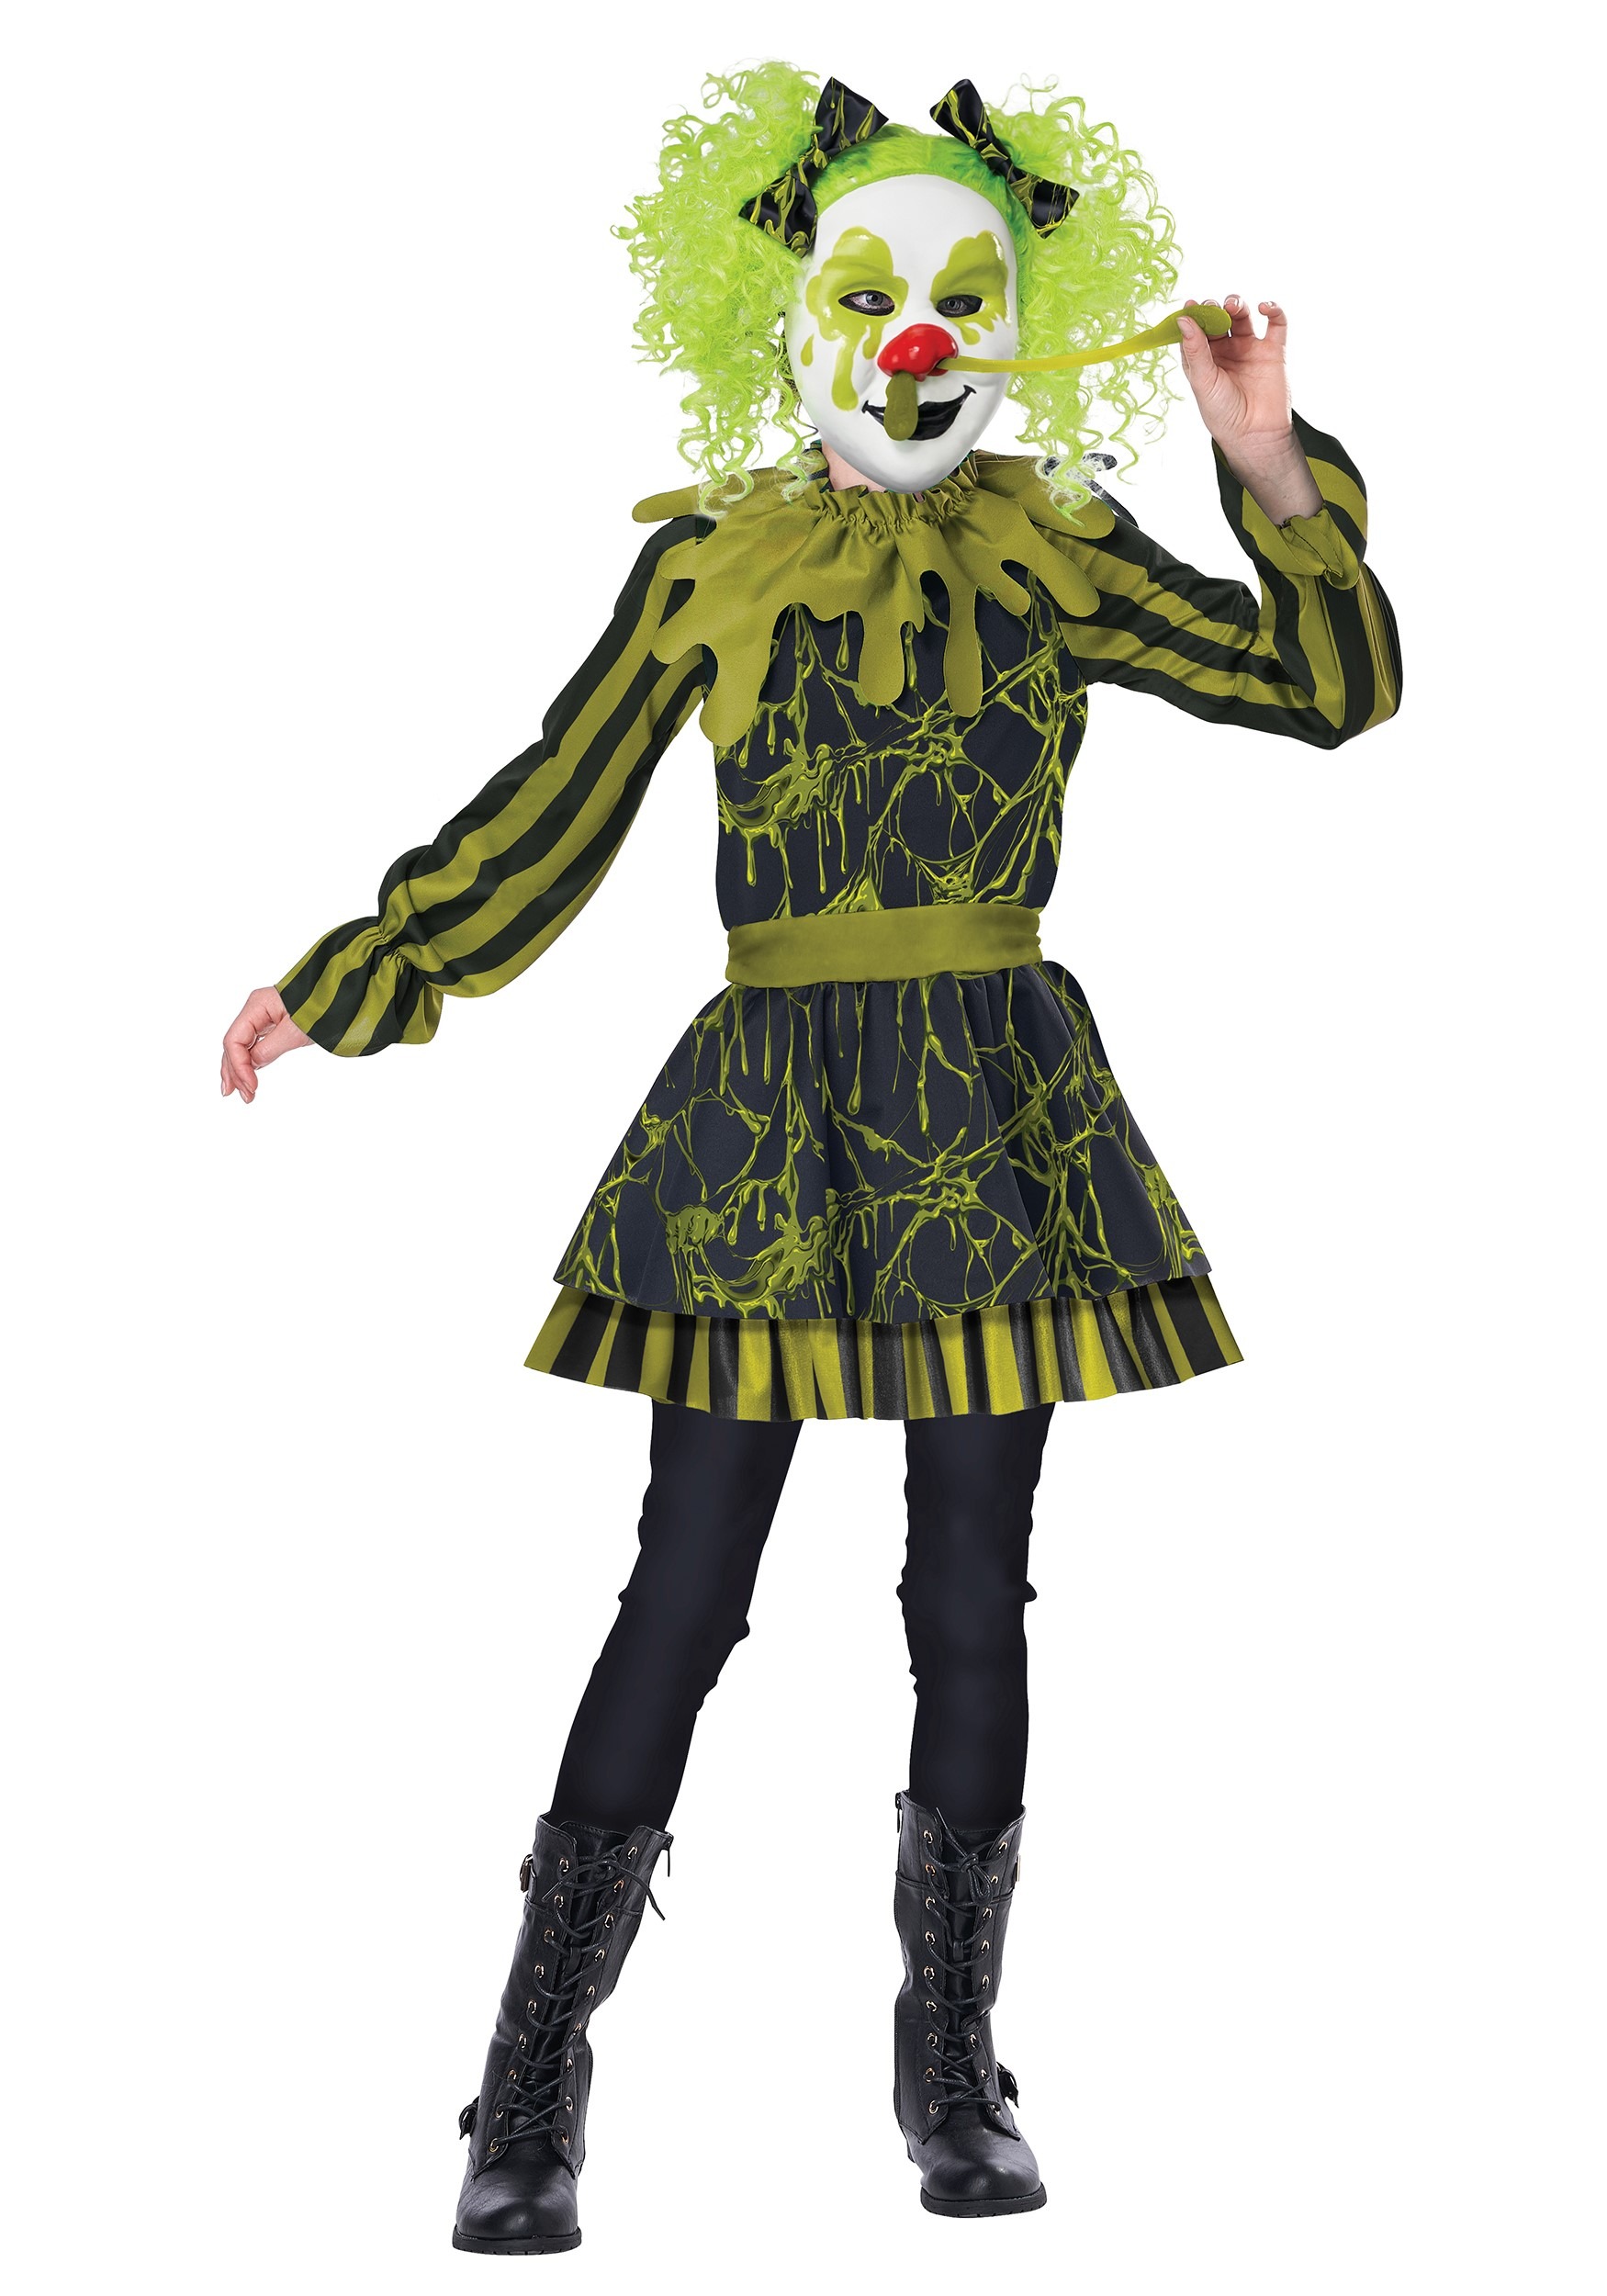 Photos - Fancy Dress California Costume Collection Snots Of Fun Clown Costume for Girls Black&# 